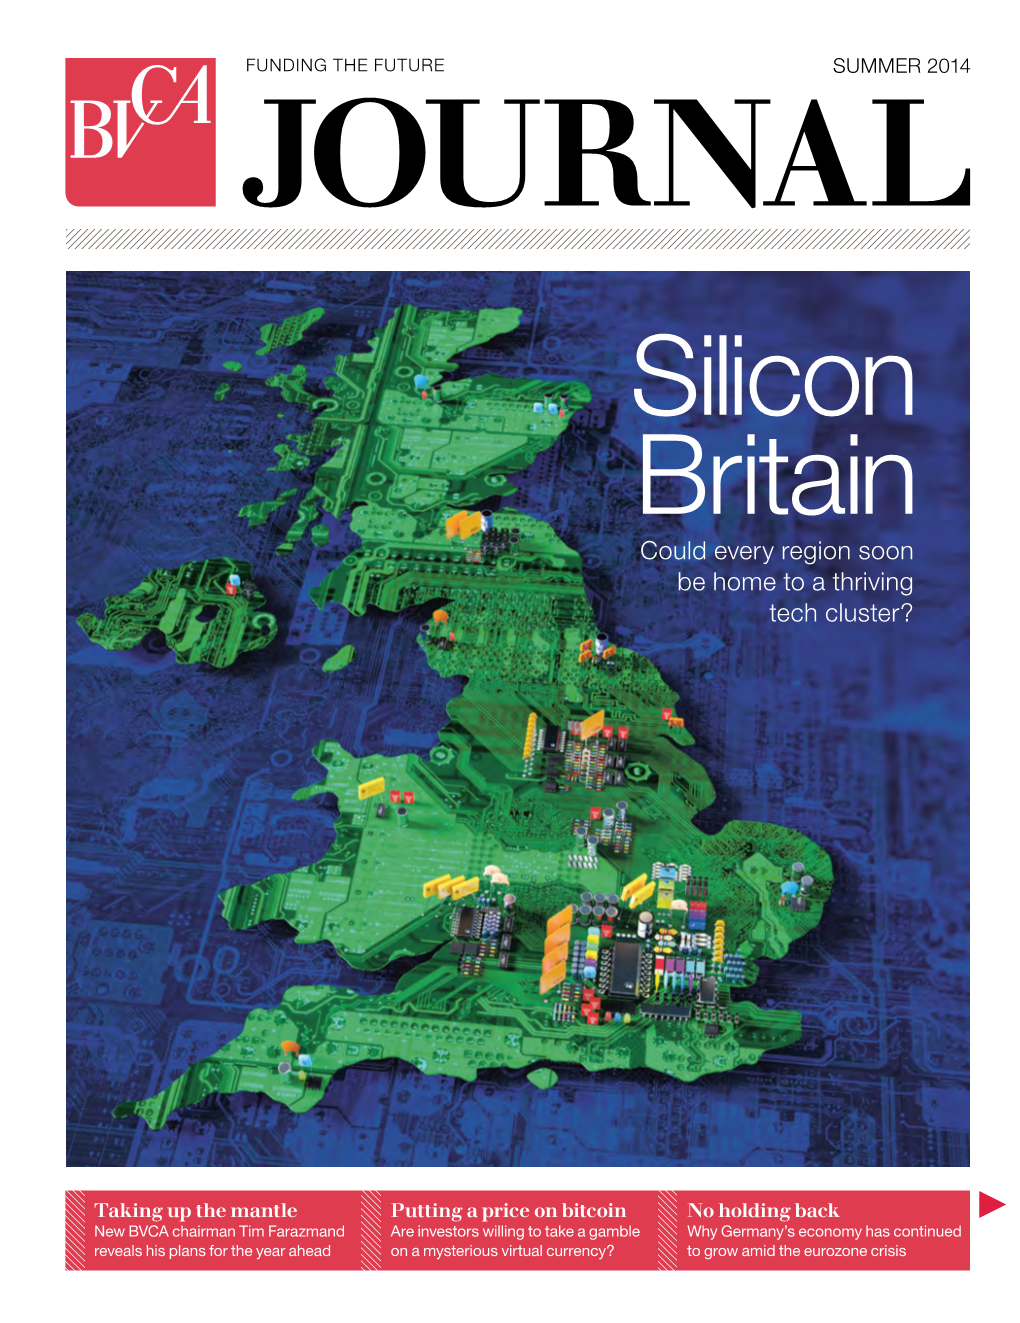 Silicon Britain Could Every Region Soon Be Home to a Thriving Tech Cluster?